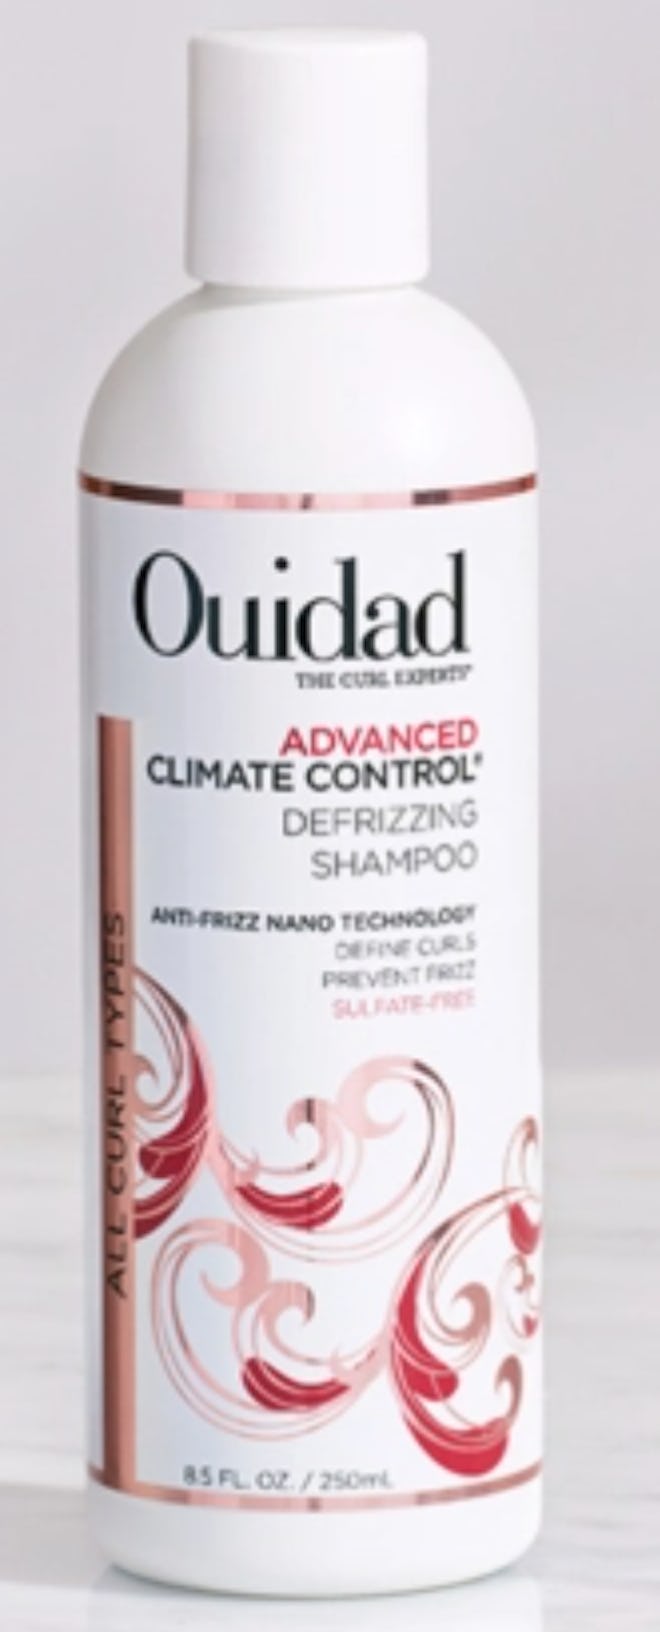 Ouidad Advanced Climate Control Defrizzing Shampoo for frizz-free curls